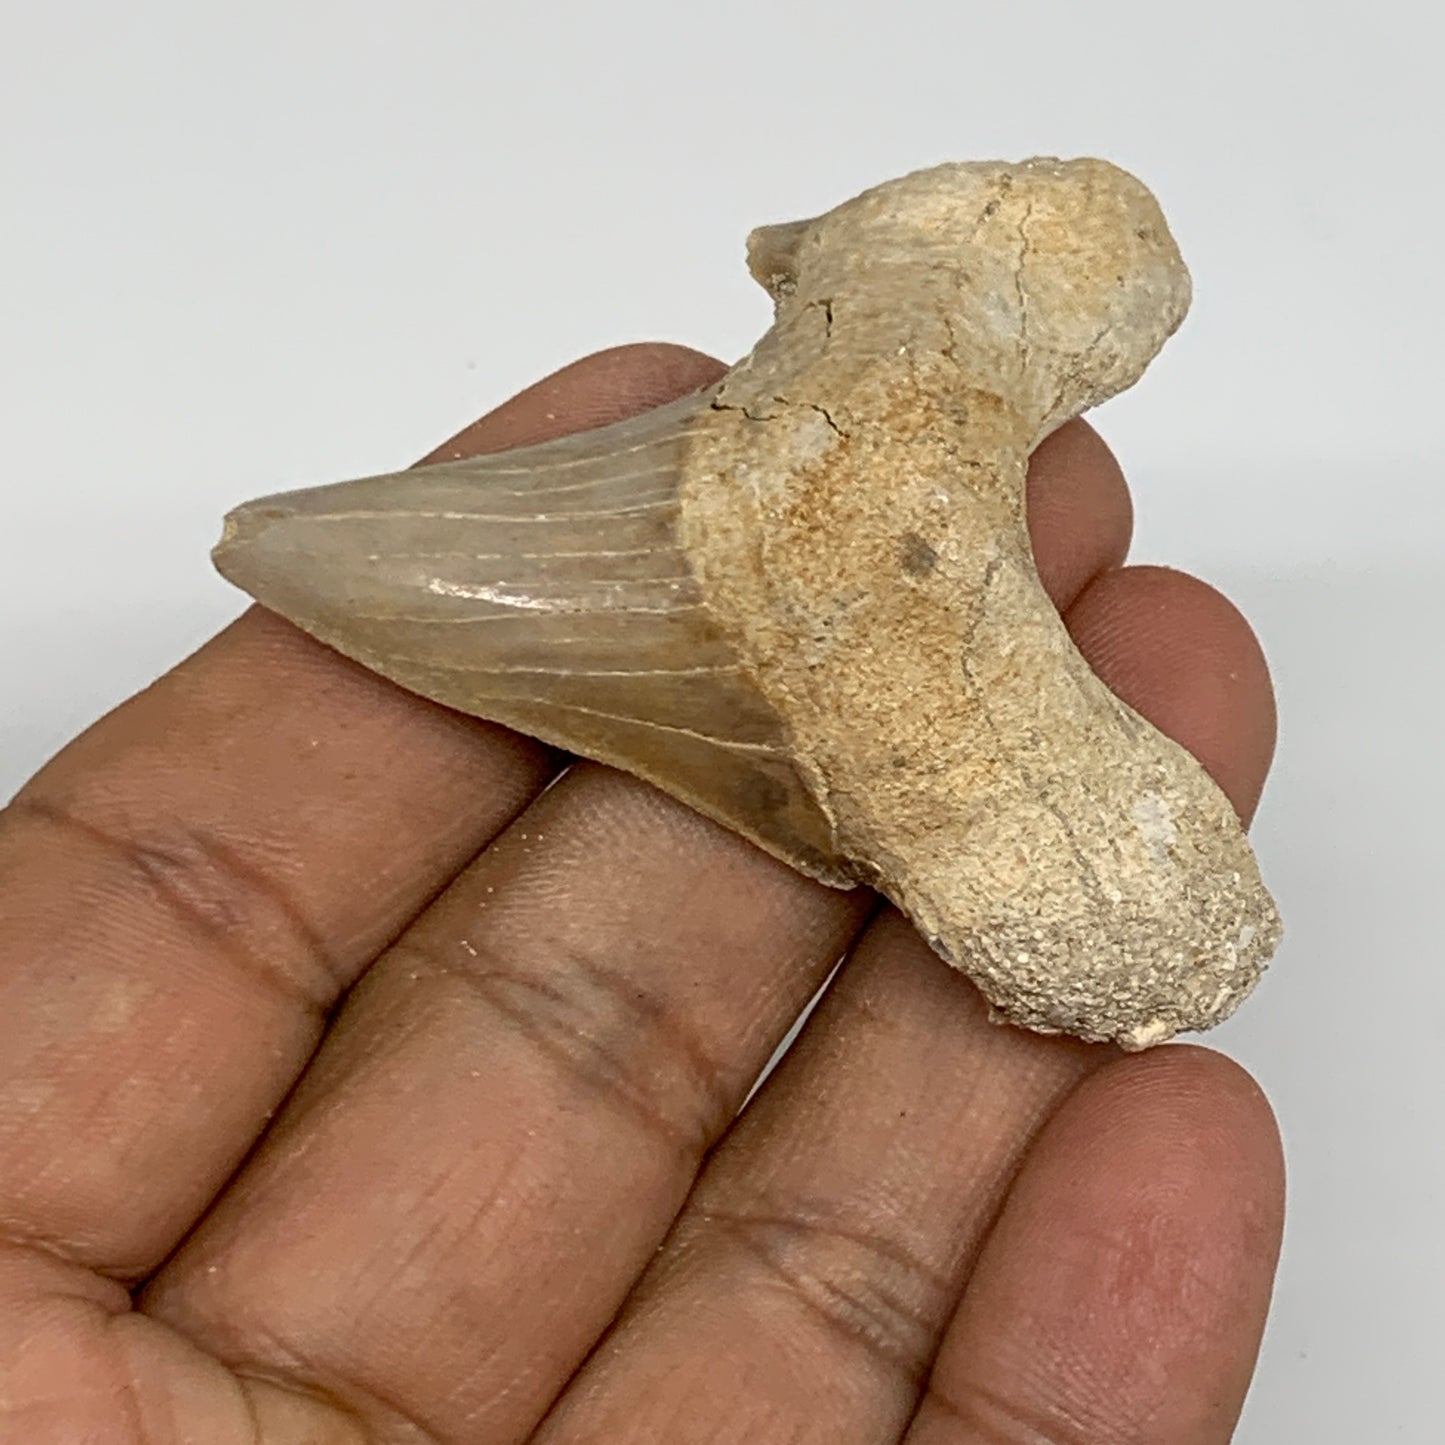 24g, 2"X 1.9"x 0.6" Natural Fossils Fish Shark Tooth @Morocco, B12718